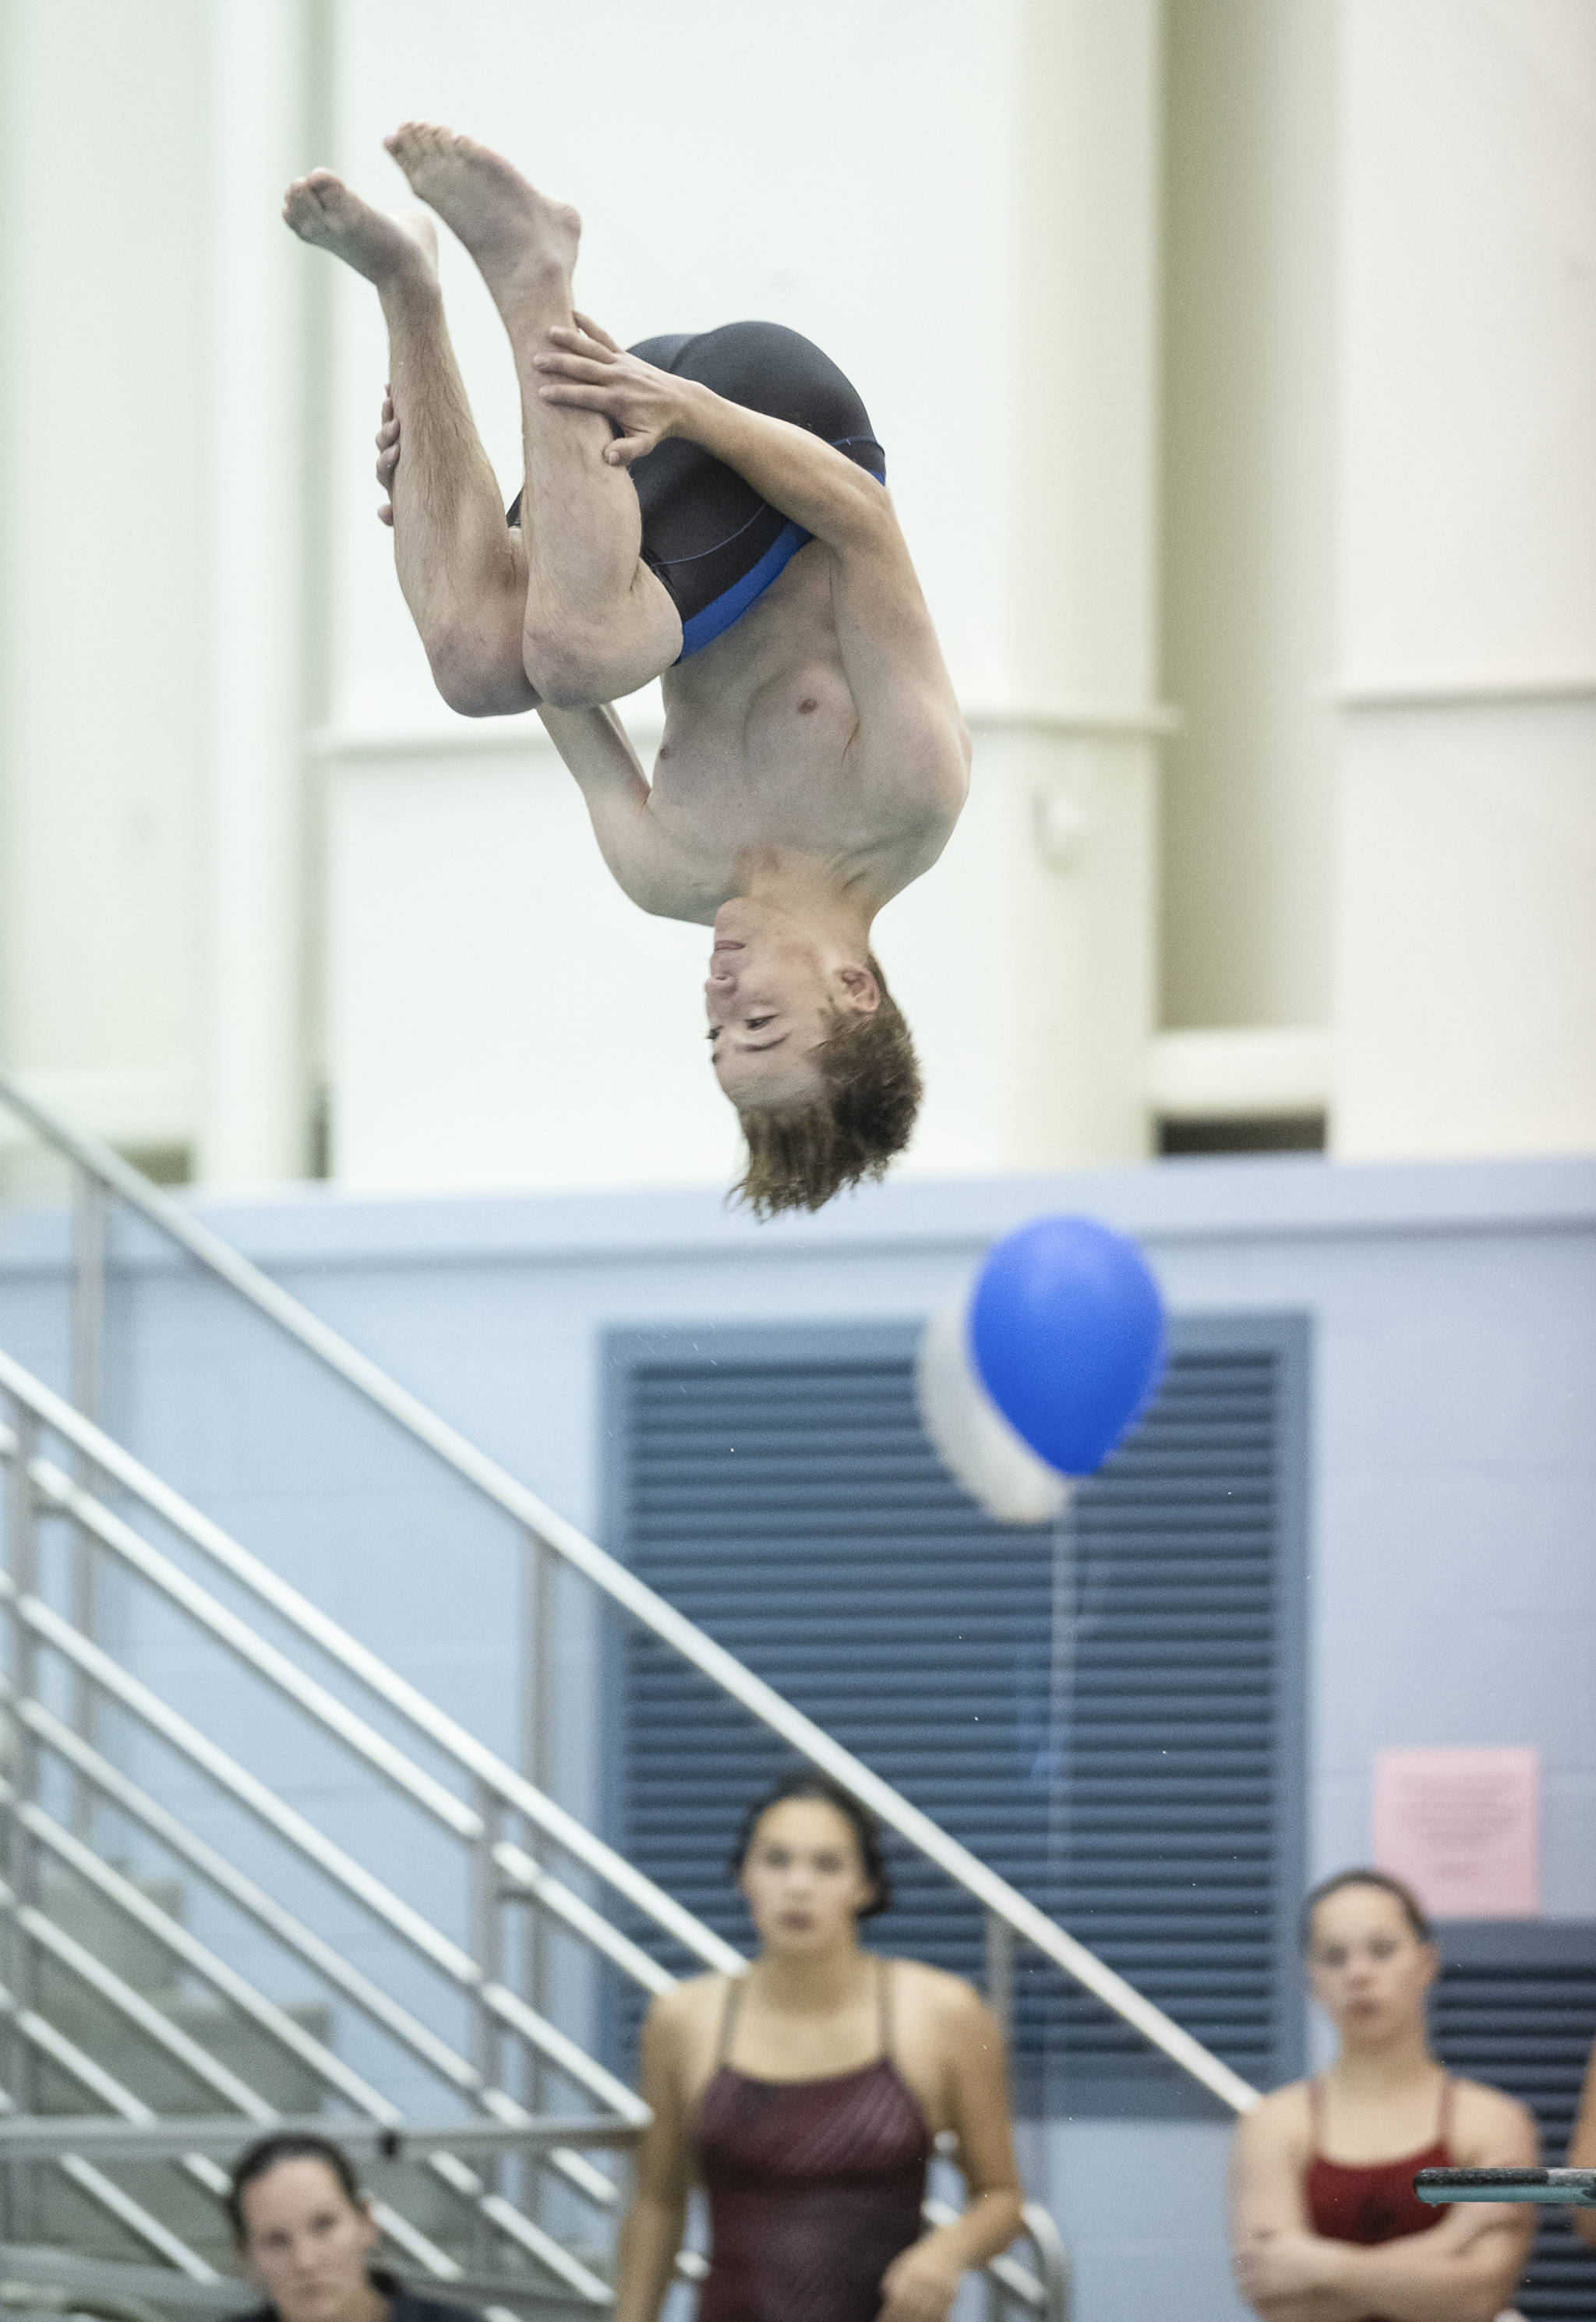 Thunder Mountain’s Caden Cunningham competes in the diving event at the Juneau Invitational Swim Meet at the Dimond Park Aquatic Center on Friday, Sept. 20, 2019. (Michael Penn | Juneau Empire)